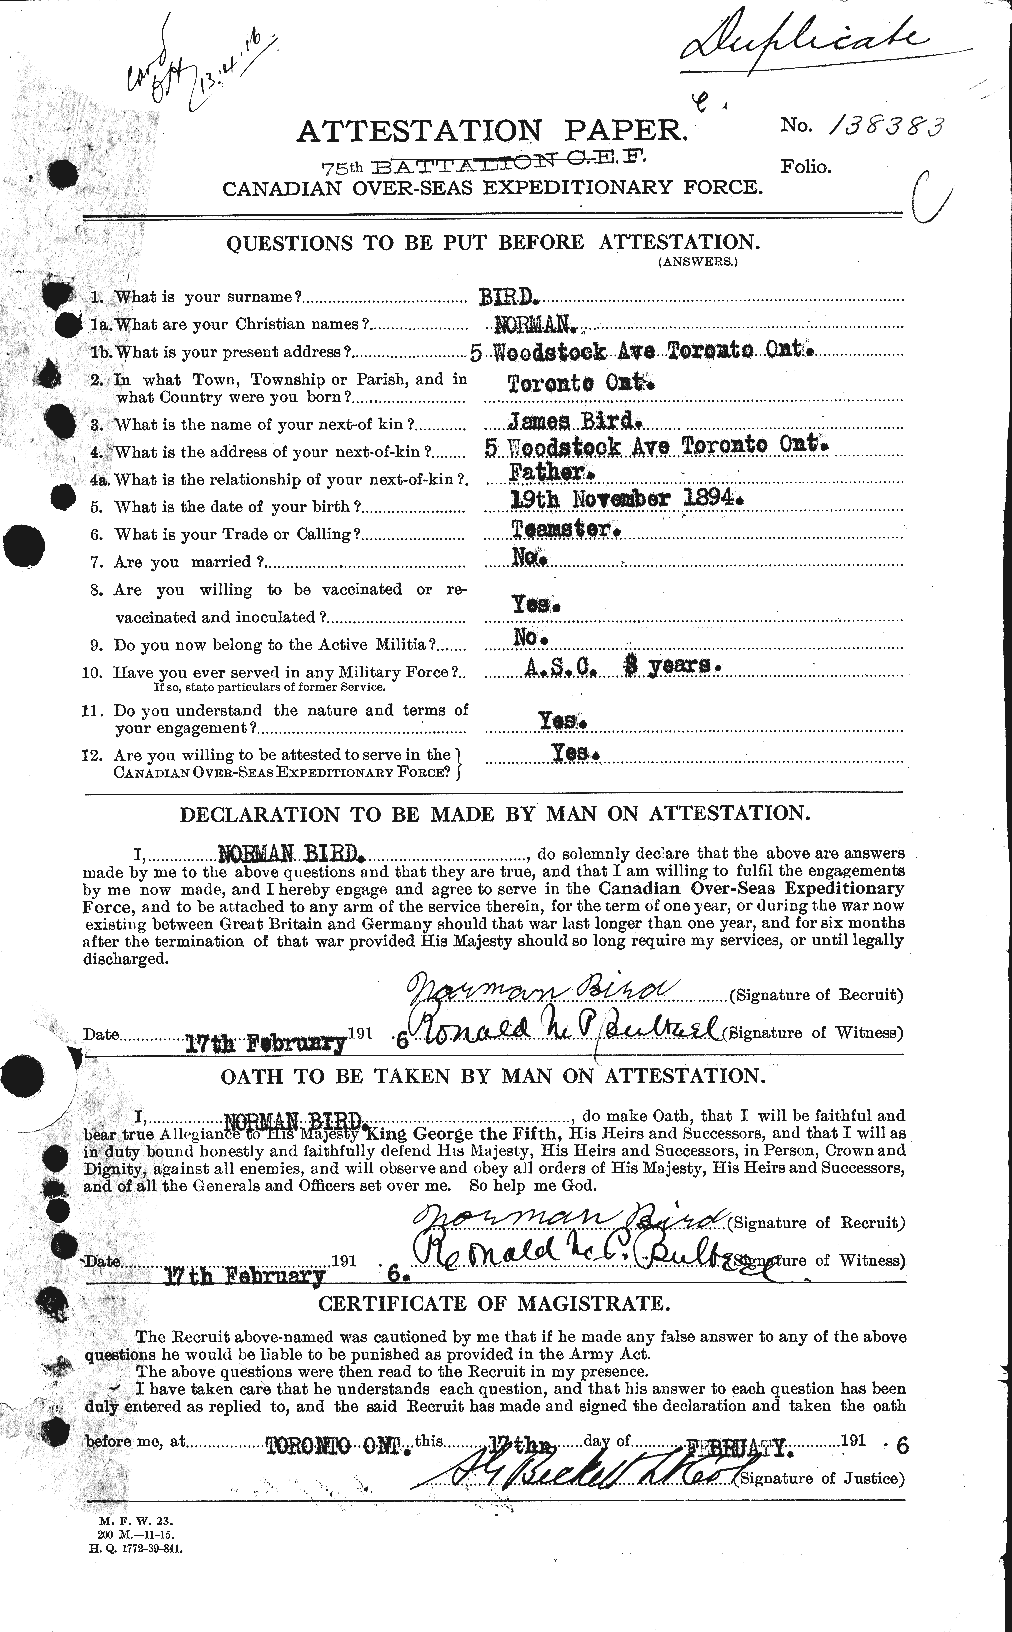 Personnel Records of the First World War - CEF 239485a